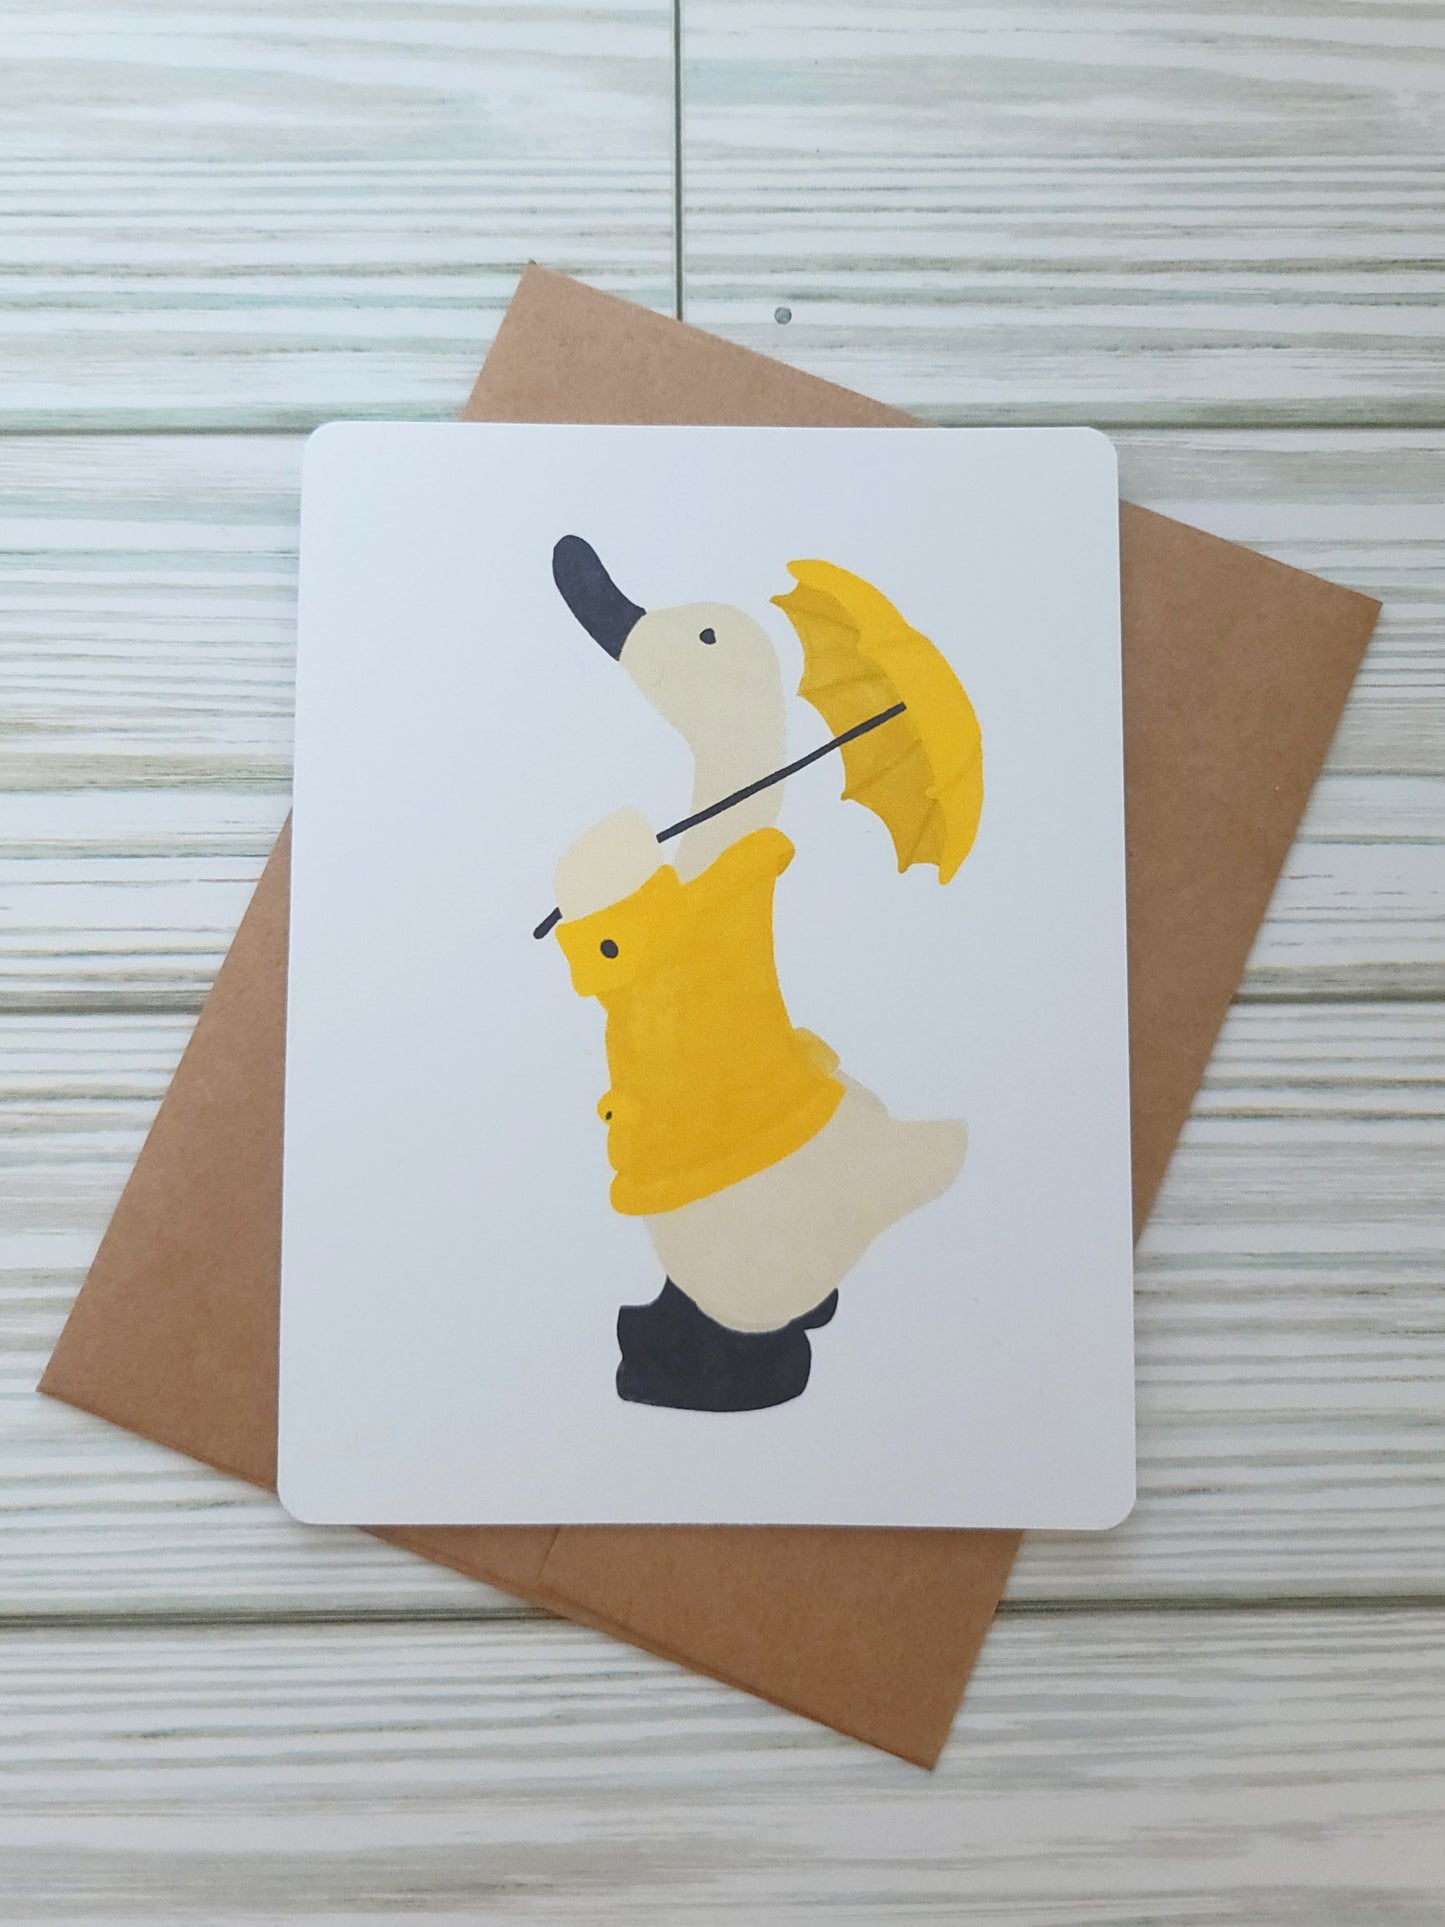 Duck in a Yellow Rainjacket with Umbrella Handmade Greeting Card - Recycled Paper and Kraft Envelope - Overhead Shot